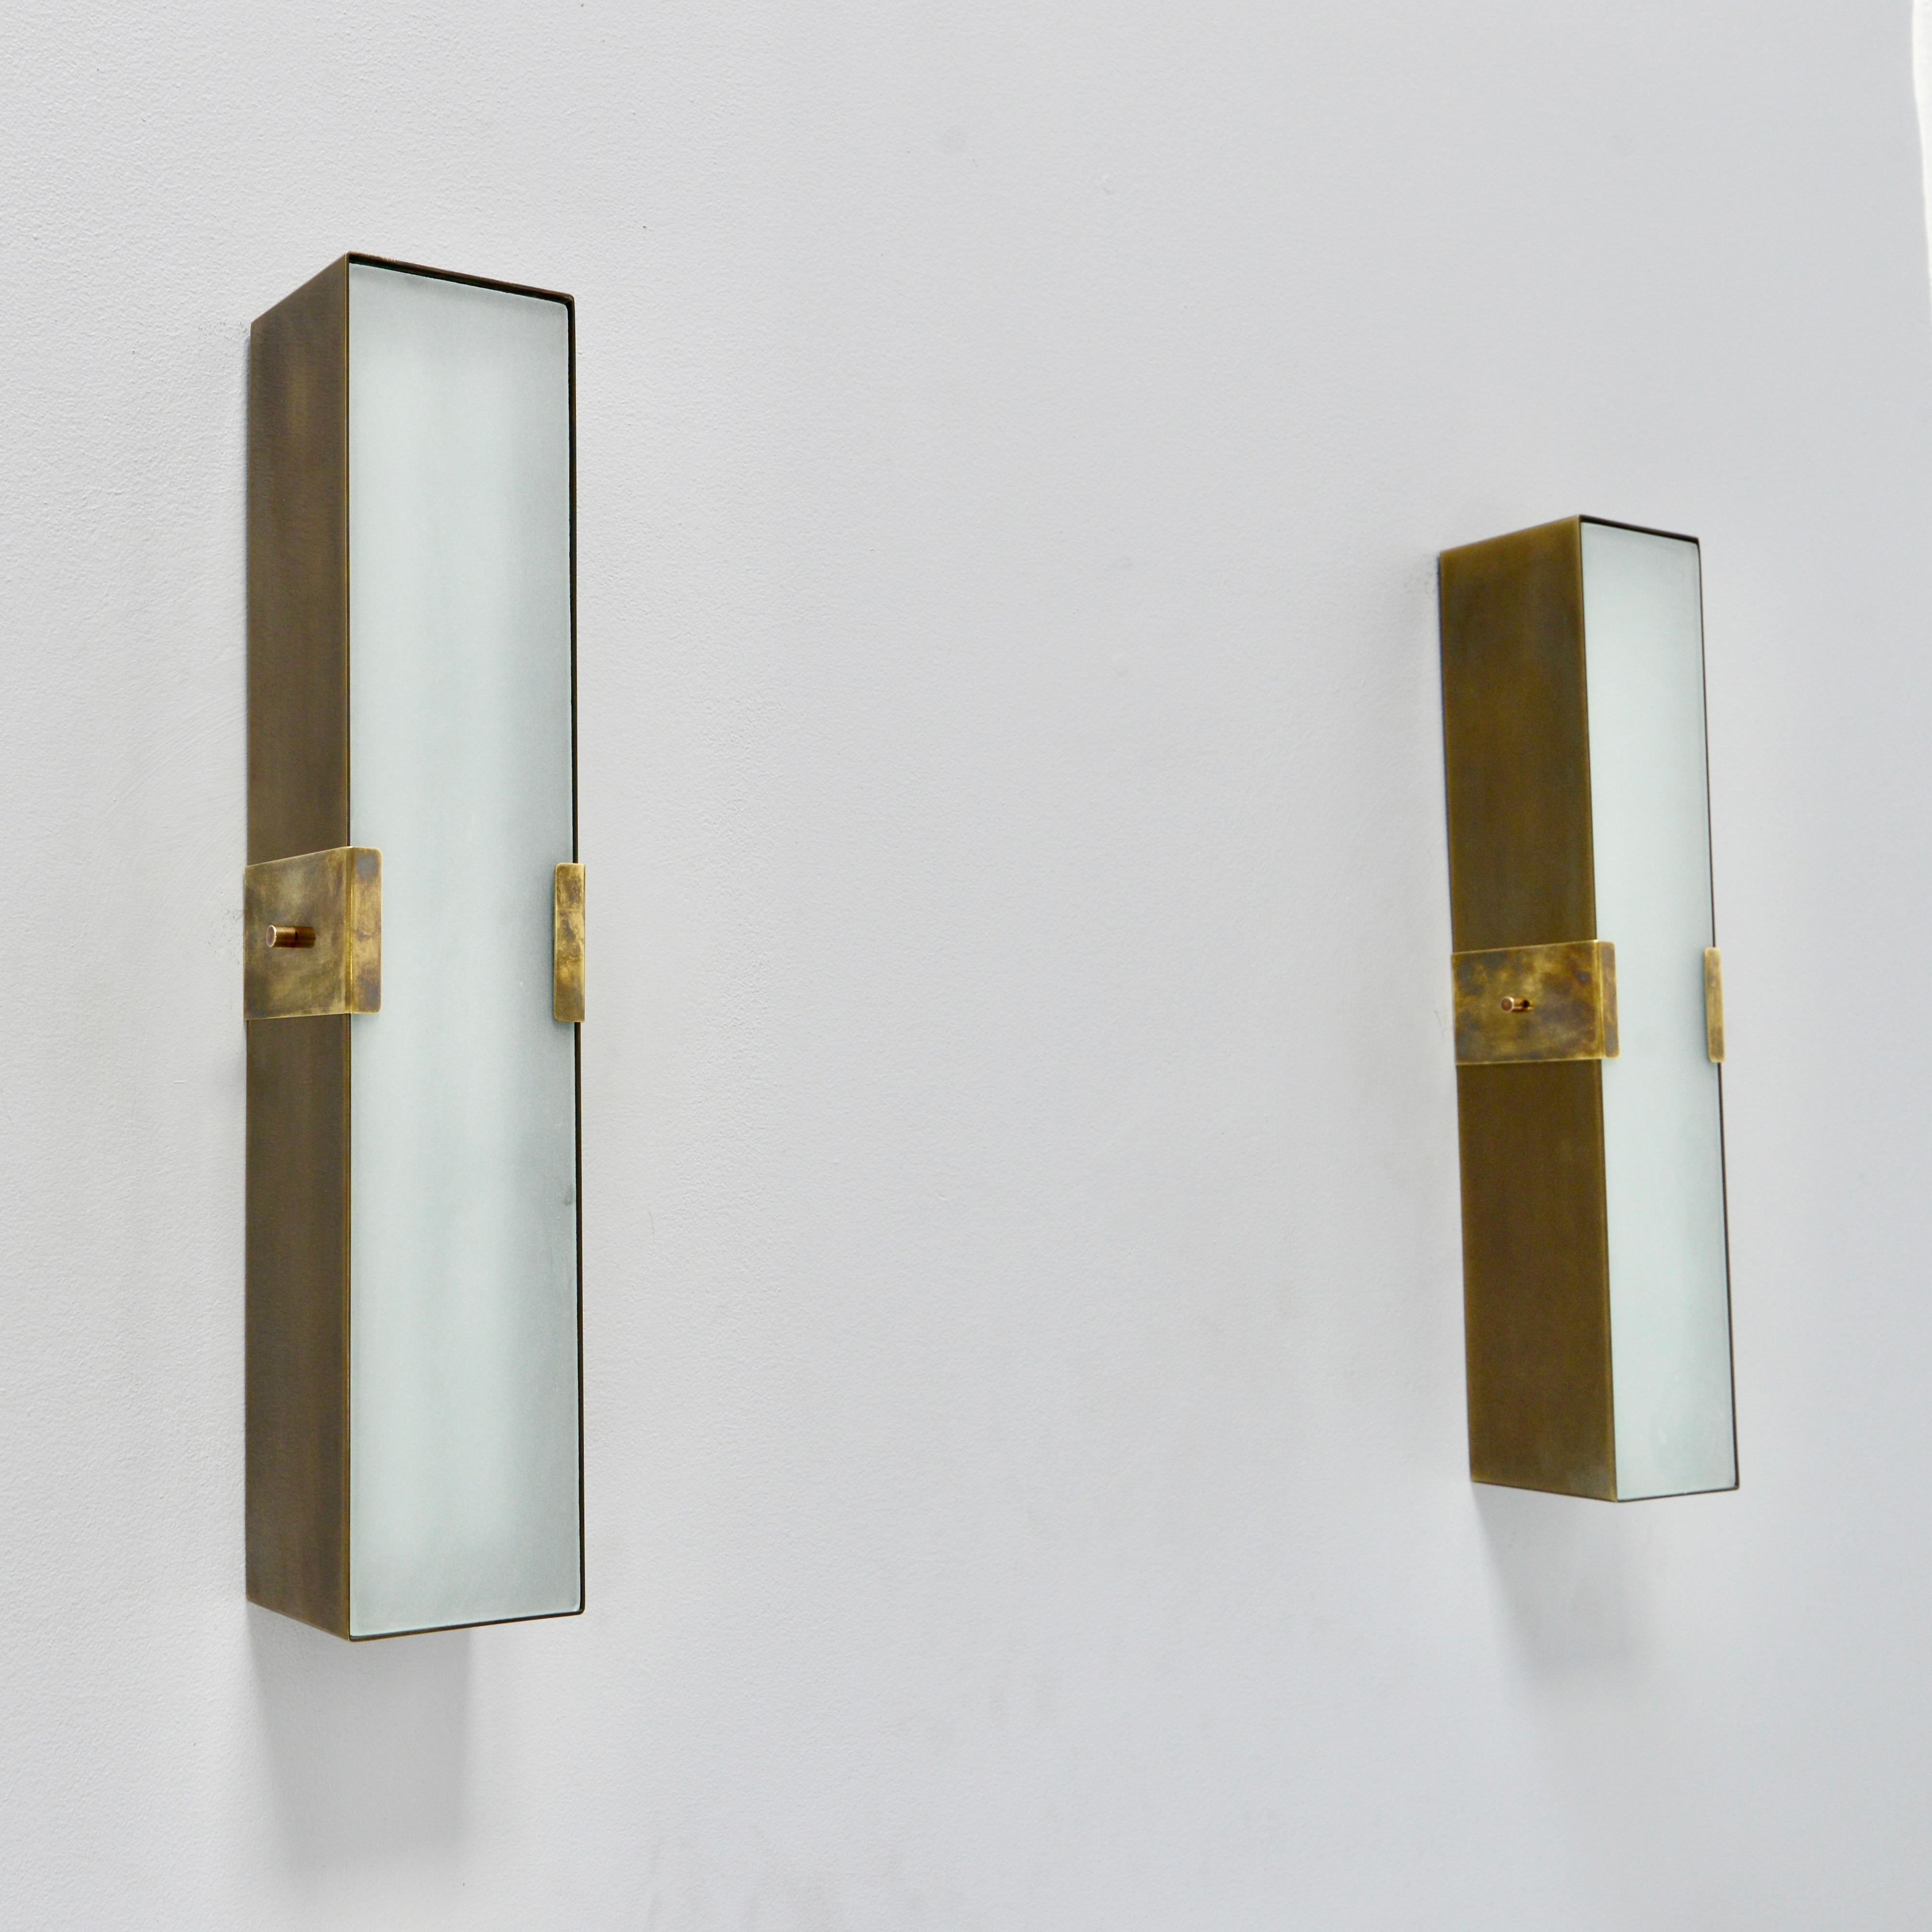 Part of Lumfardo Luminaries contemporary collection, the LUsquare RT BR Sconce is a narrower and longer expression of our LU Square Sconce in brass. Classic mid century modern design made to order. Crafted from patinated brass steel and frosted